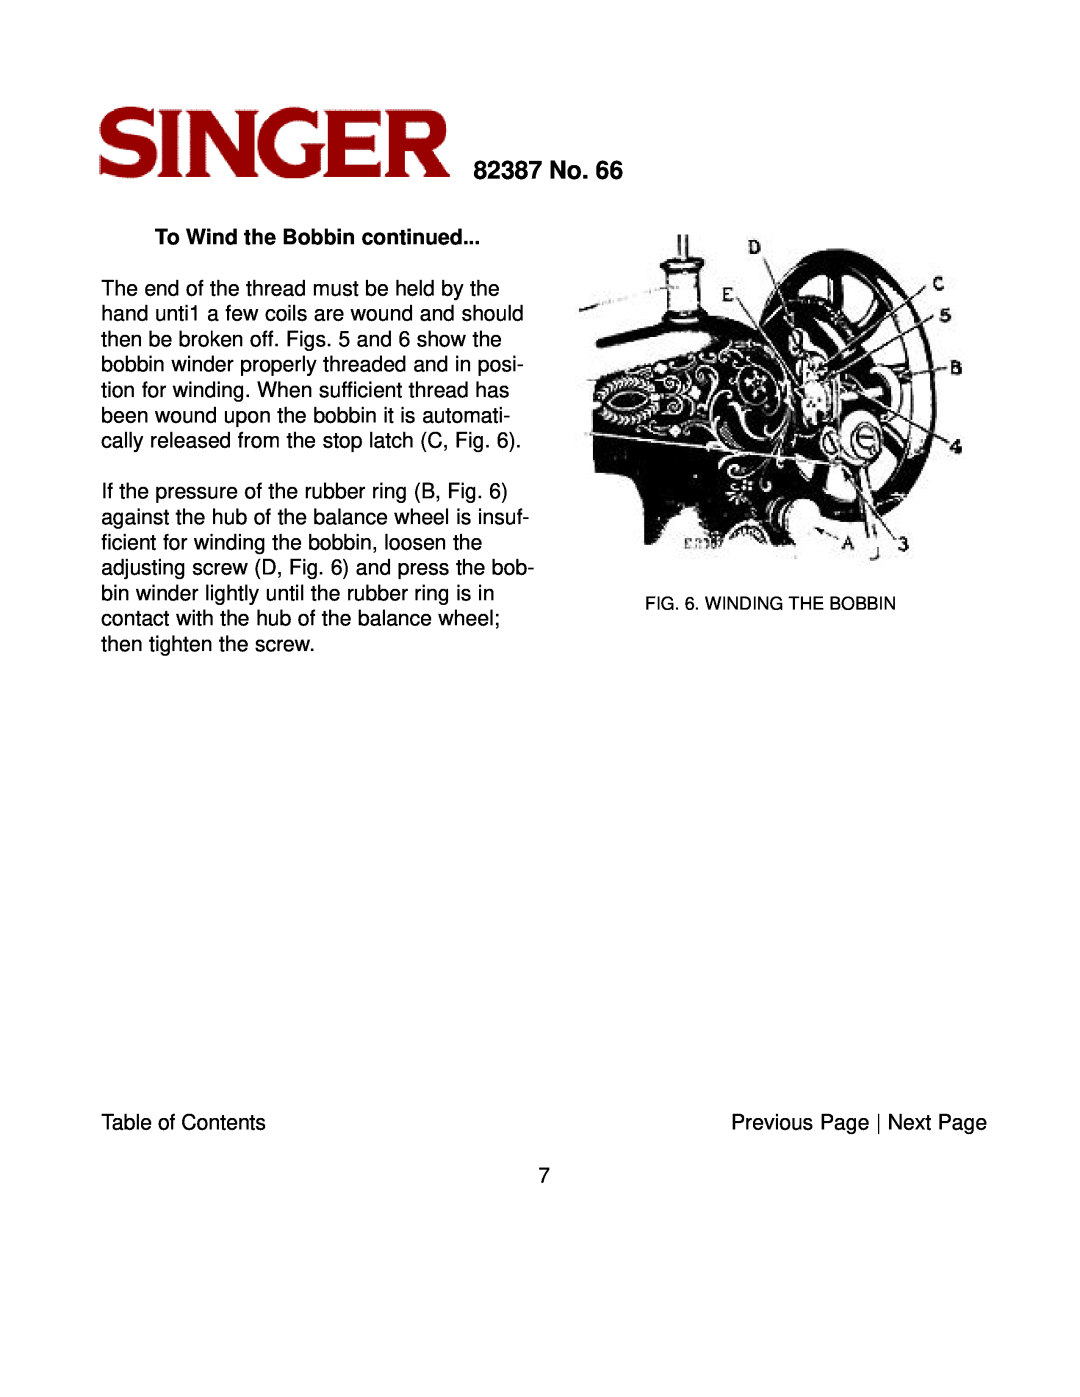 Singer instruction manual To Wind the Bobbin continued, 82387 No, Winding The Bobbin 